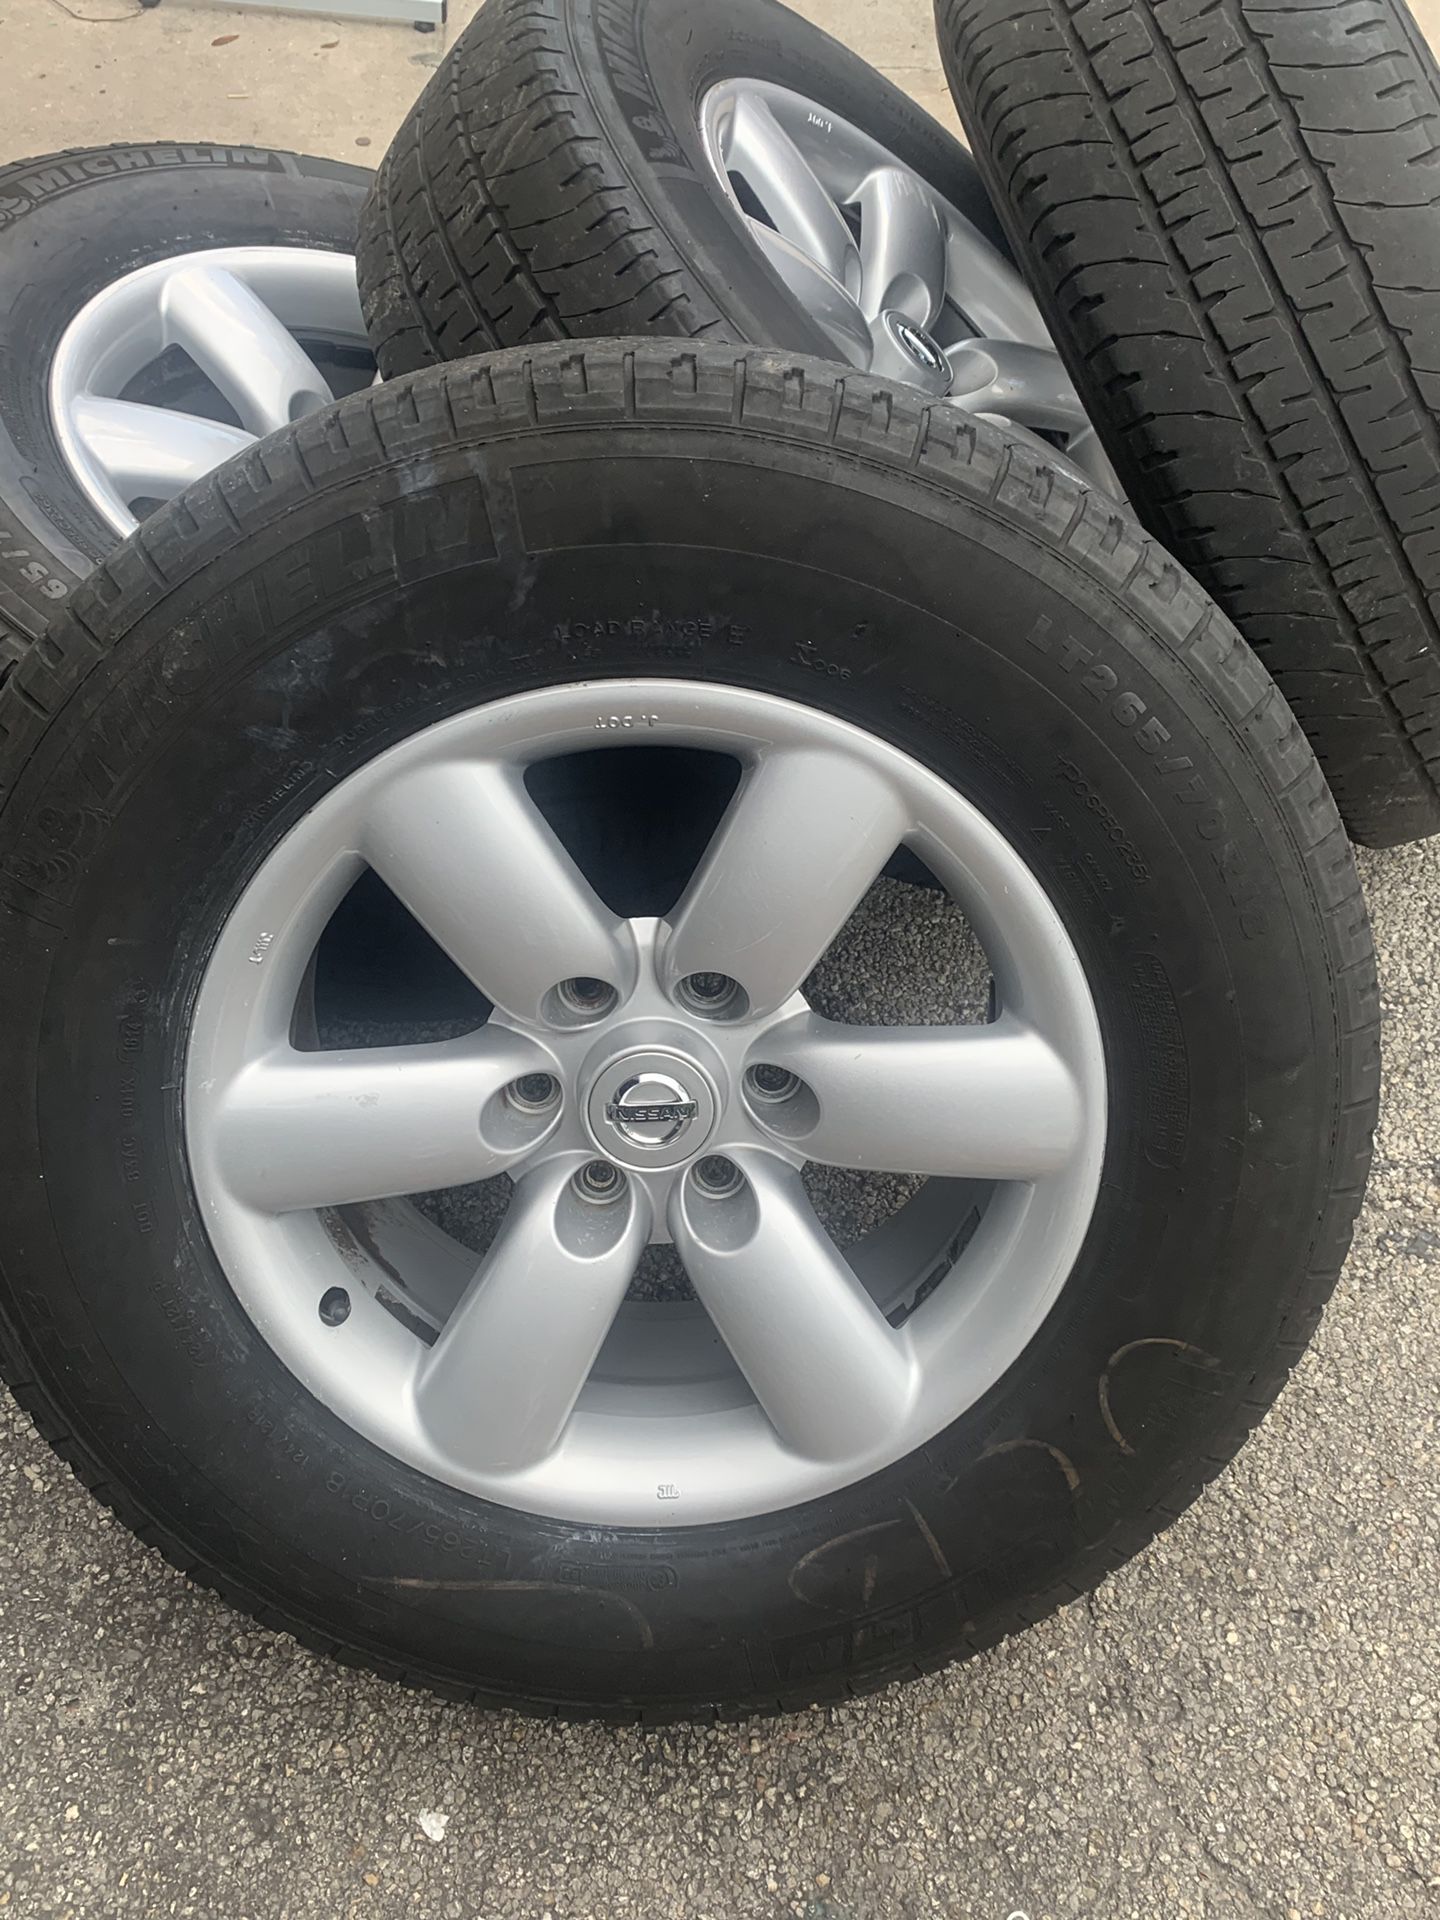 Nissan Frontier with michelin Tires 265/70/R18 LT